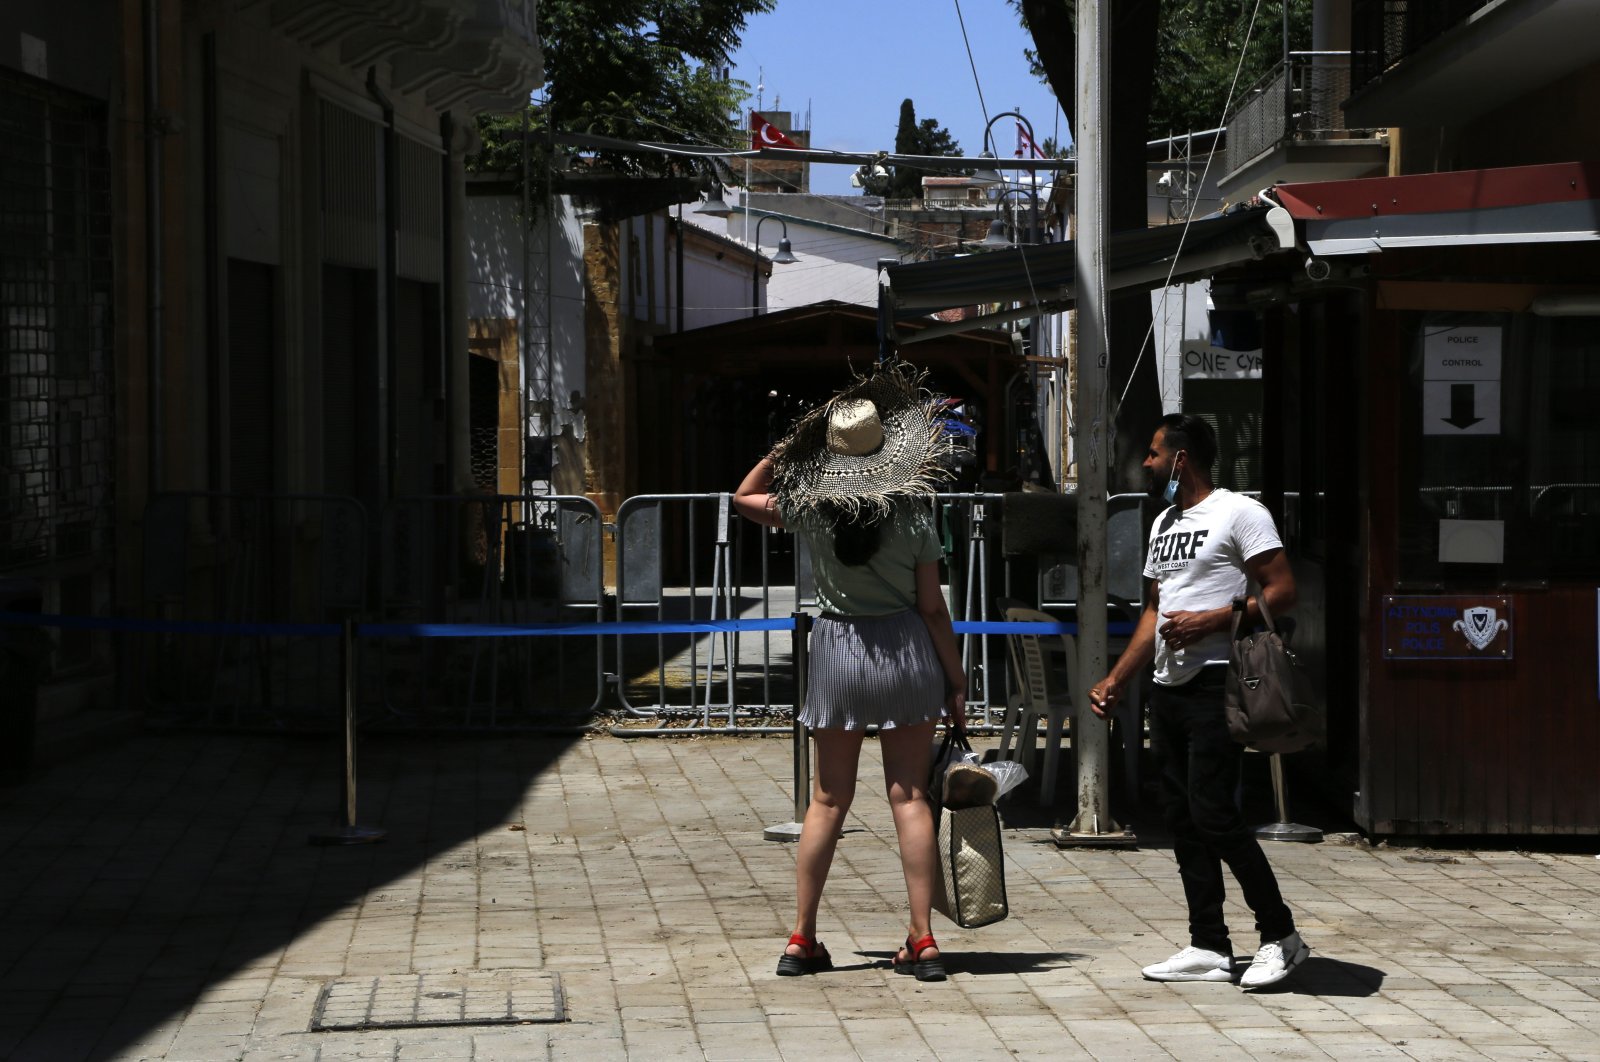 Tourists stand in front of police barriers at a closed crossing point between the Greek Cypriots (south) and the Turkish Cypriots (north), on the Ledras pedestrian street in the divided capital Nicosia, on the island of Cyprus, June 2, 2021. (AP Photo)